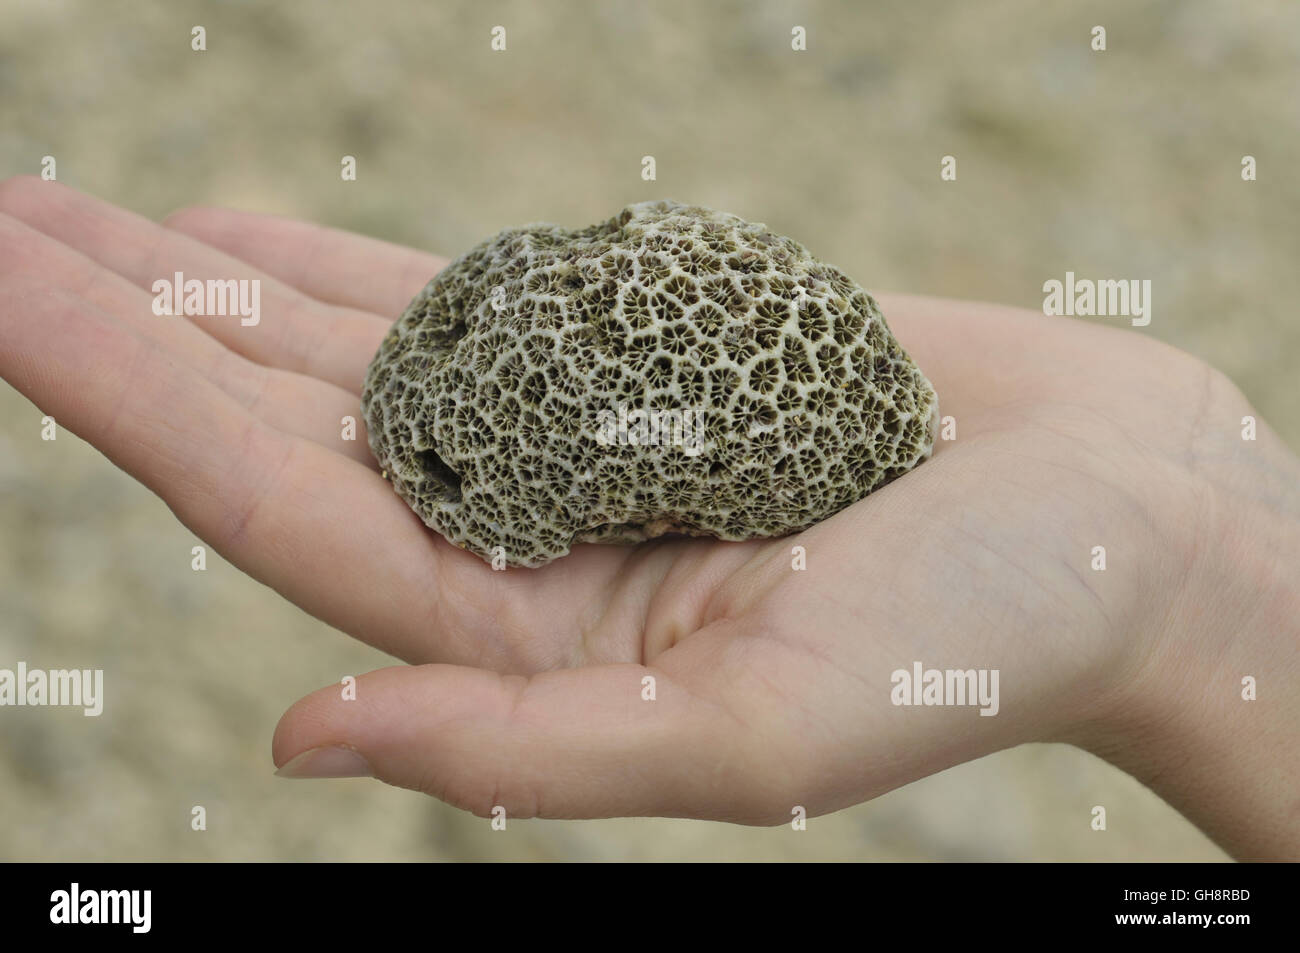 Brain coral in hand Stock Photo